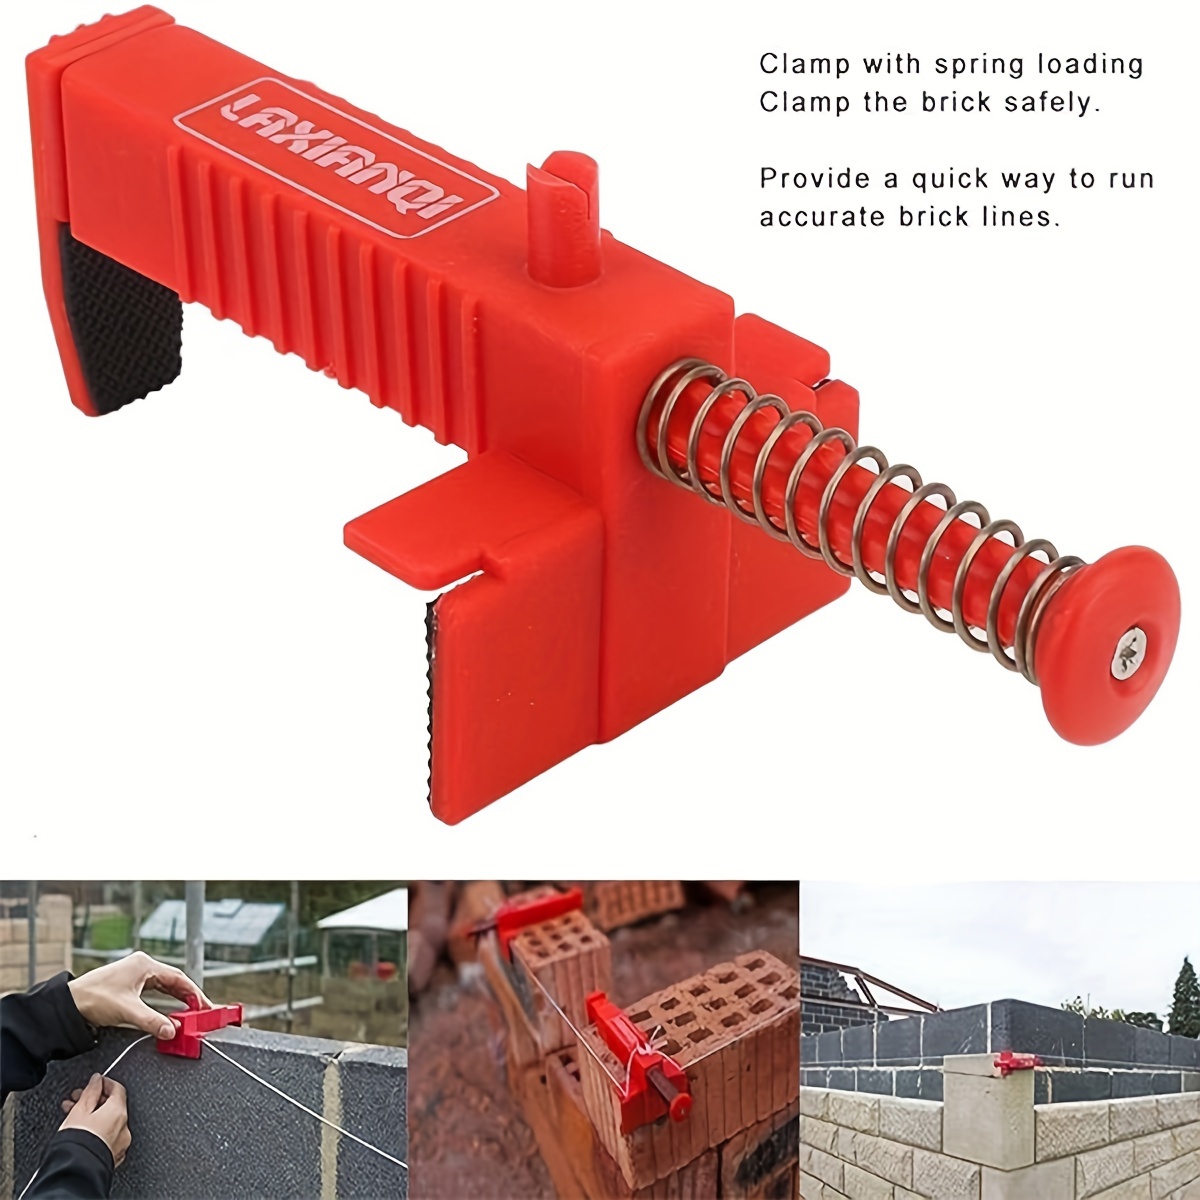 

2-piece Red Brickwork Line Puller - 3.5-4.7" Adjustable Clips For Precise Leveling & Measuring, Durable Plastic Construction Tool